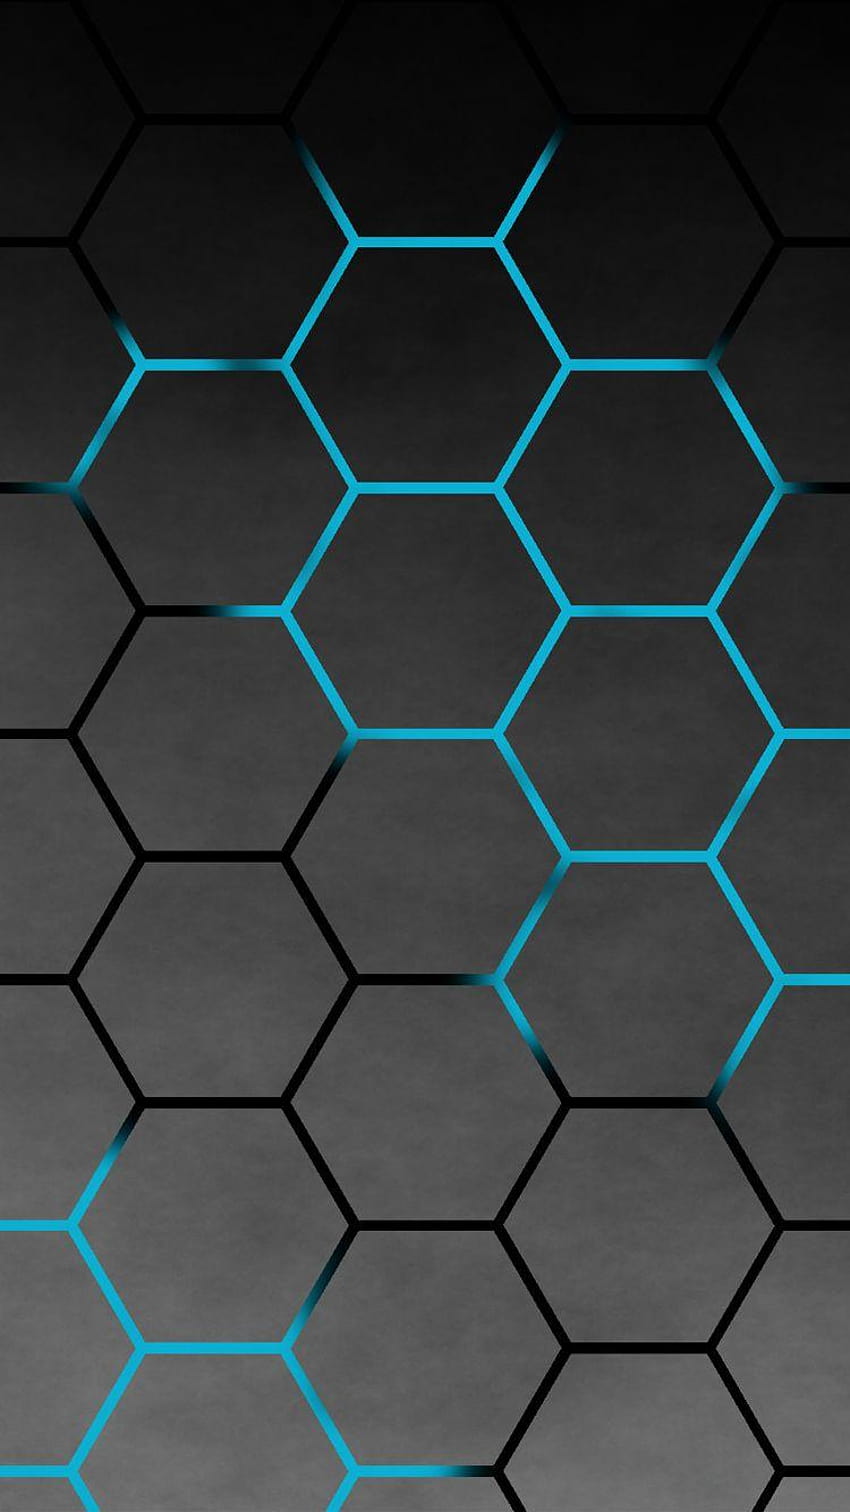 Honeycomb Wallpapers, HD Honeycomb Backgrounds, Free Images Download